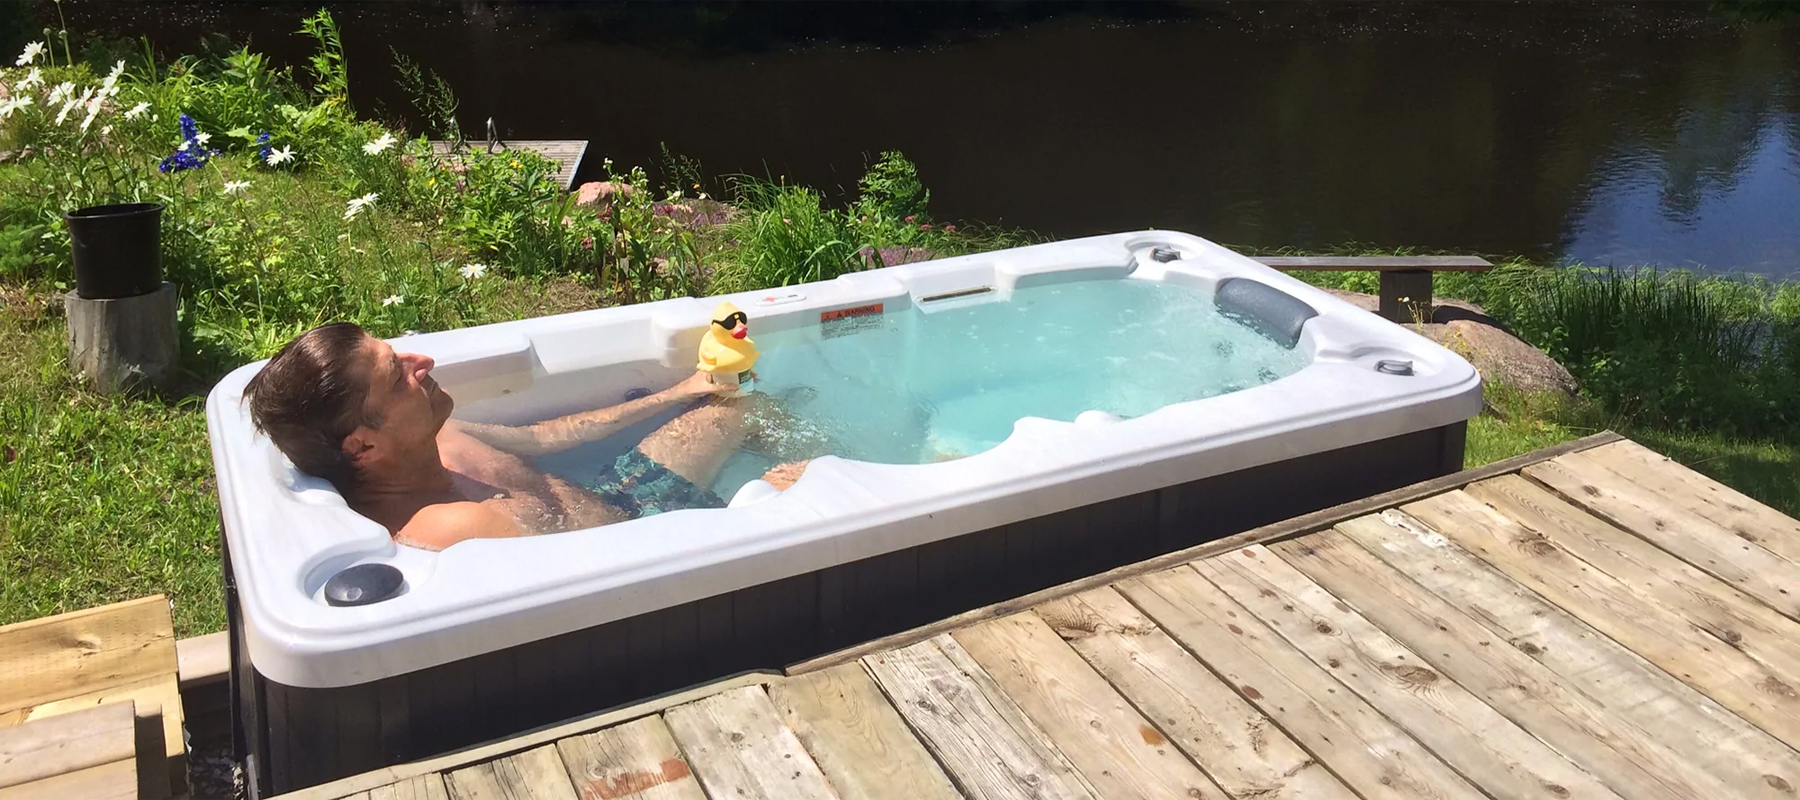 How Much Does a Two or Three Person Hot Tub Cost?